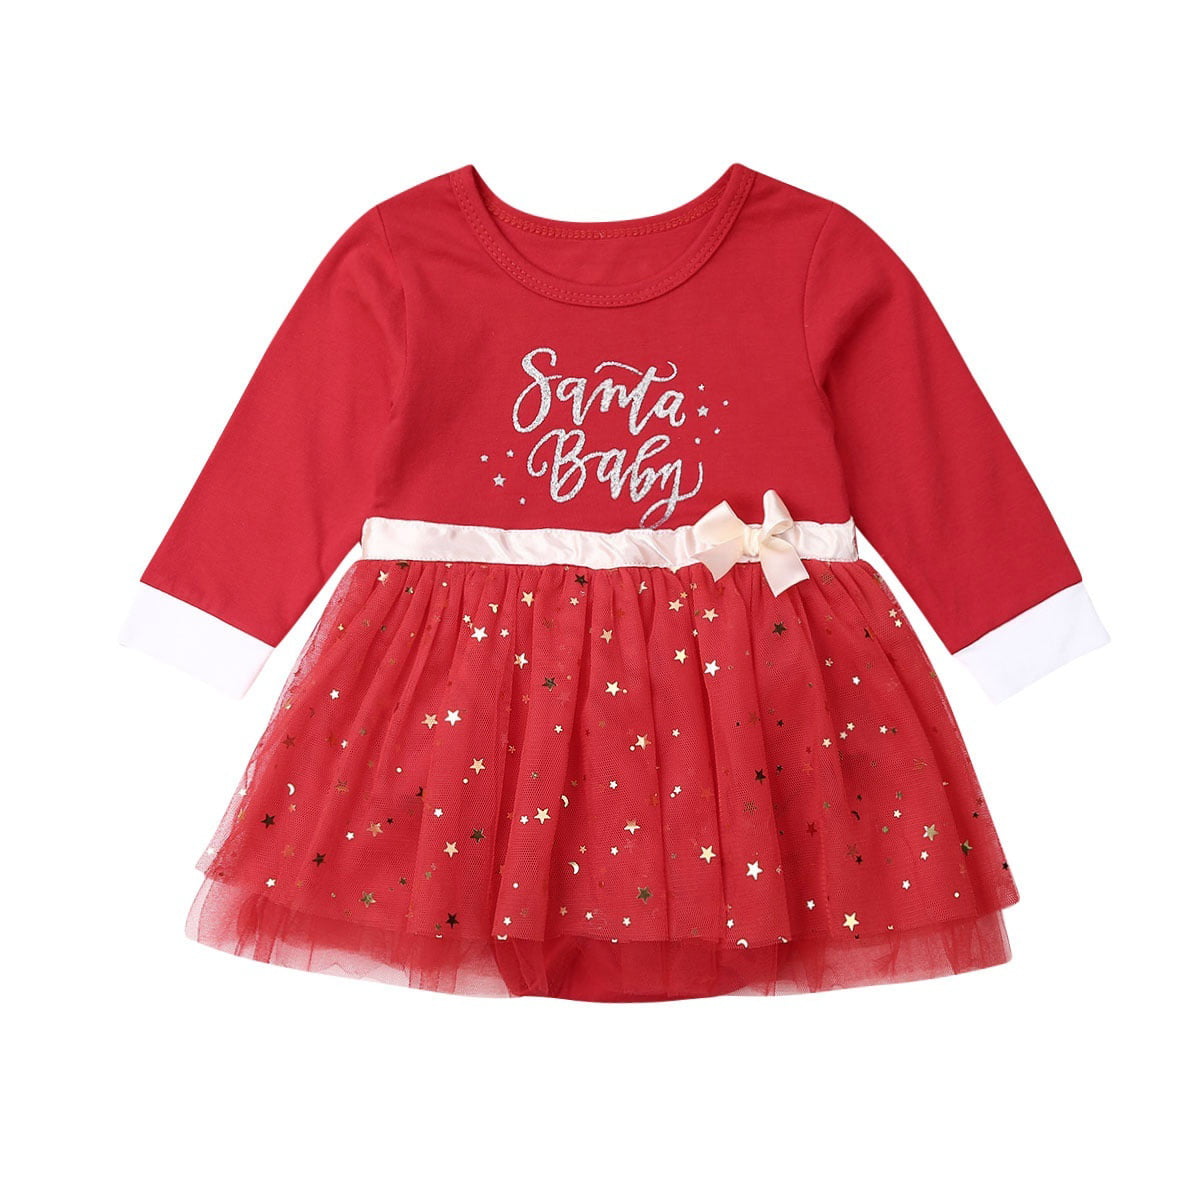 US Infant Baby Girls Christmas Tutu Dress Outfit Sequins Xmas Party Romper Skirt